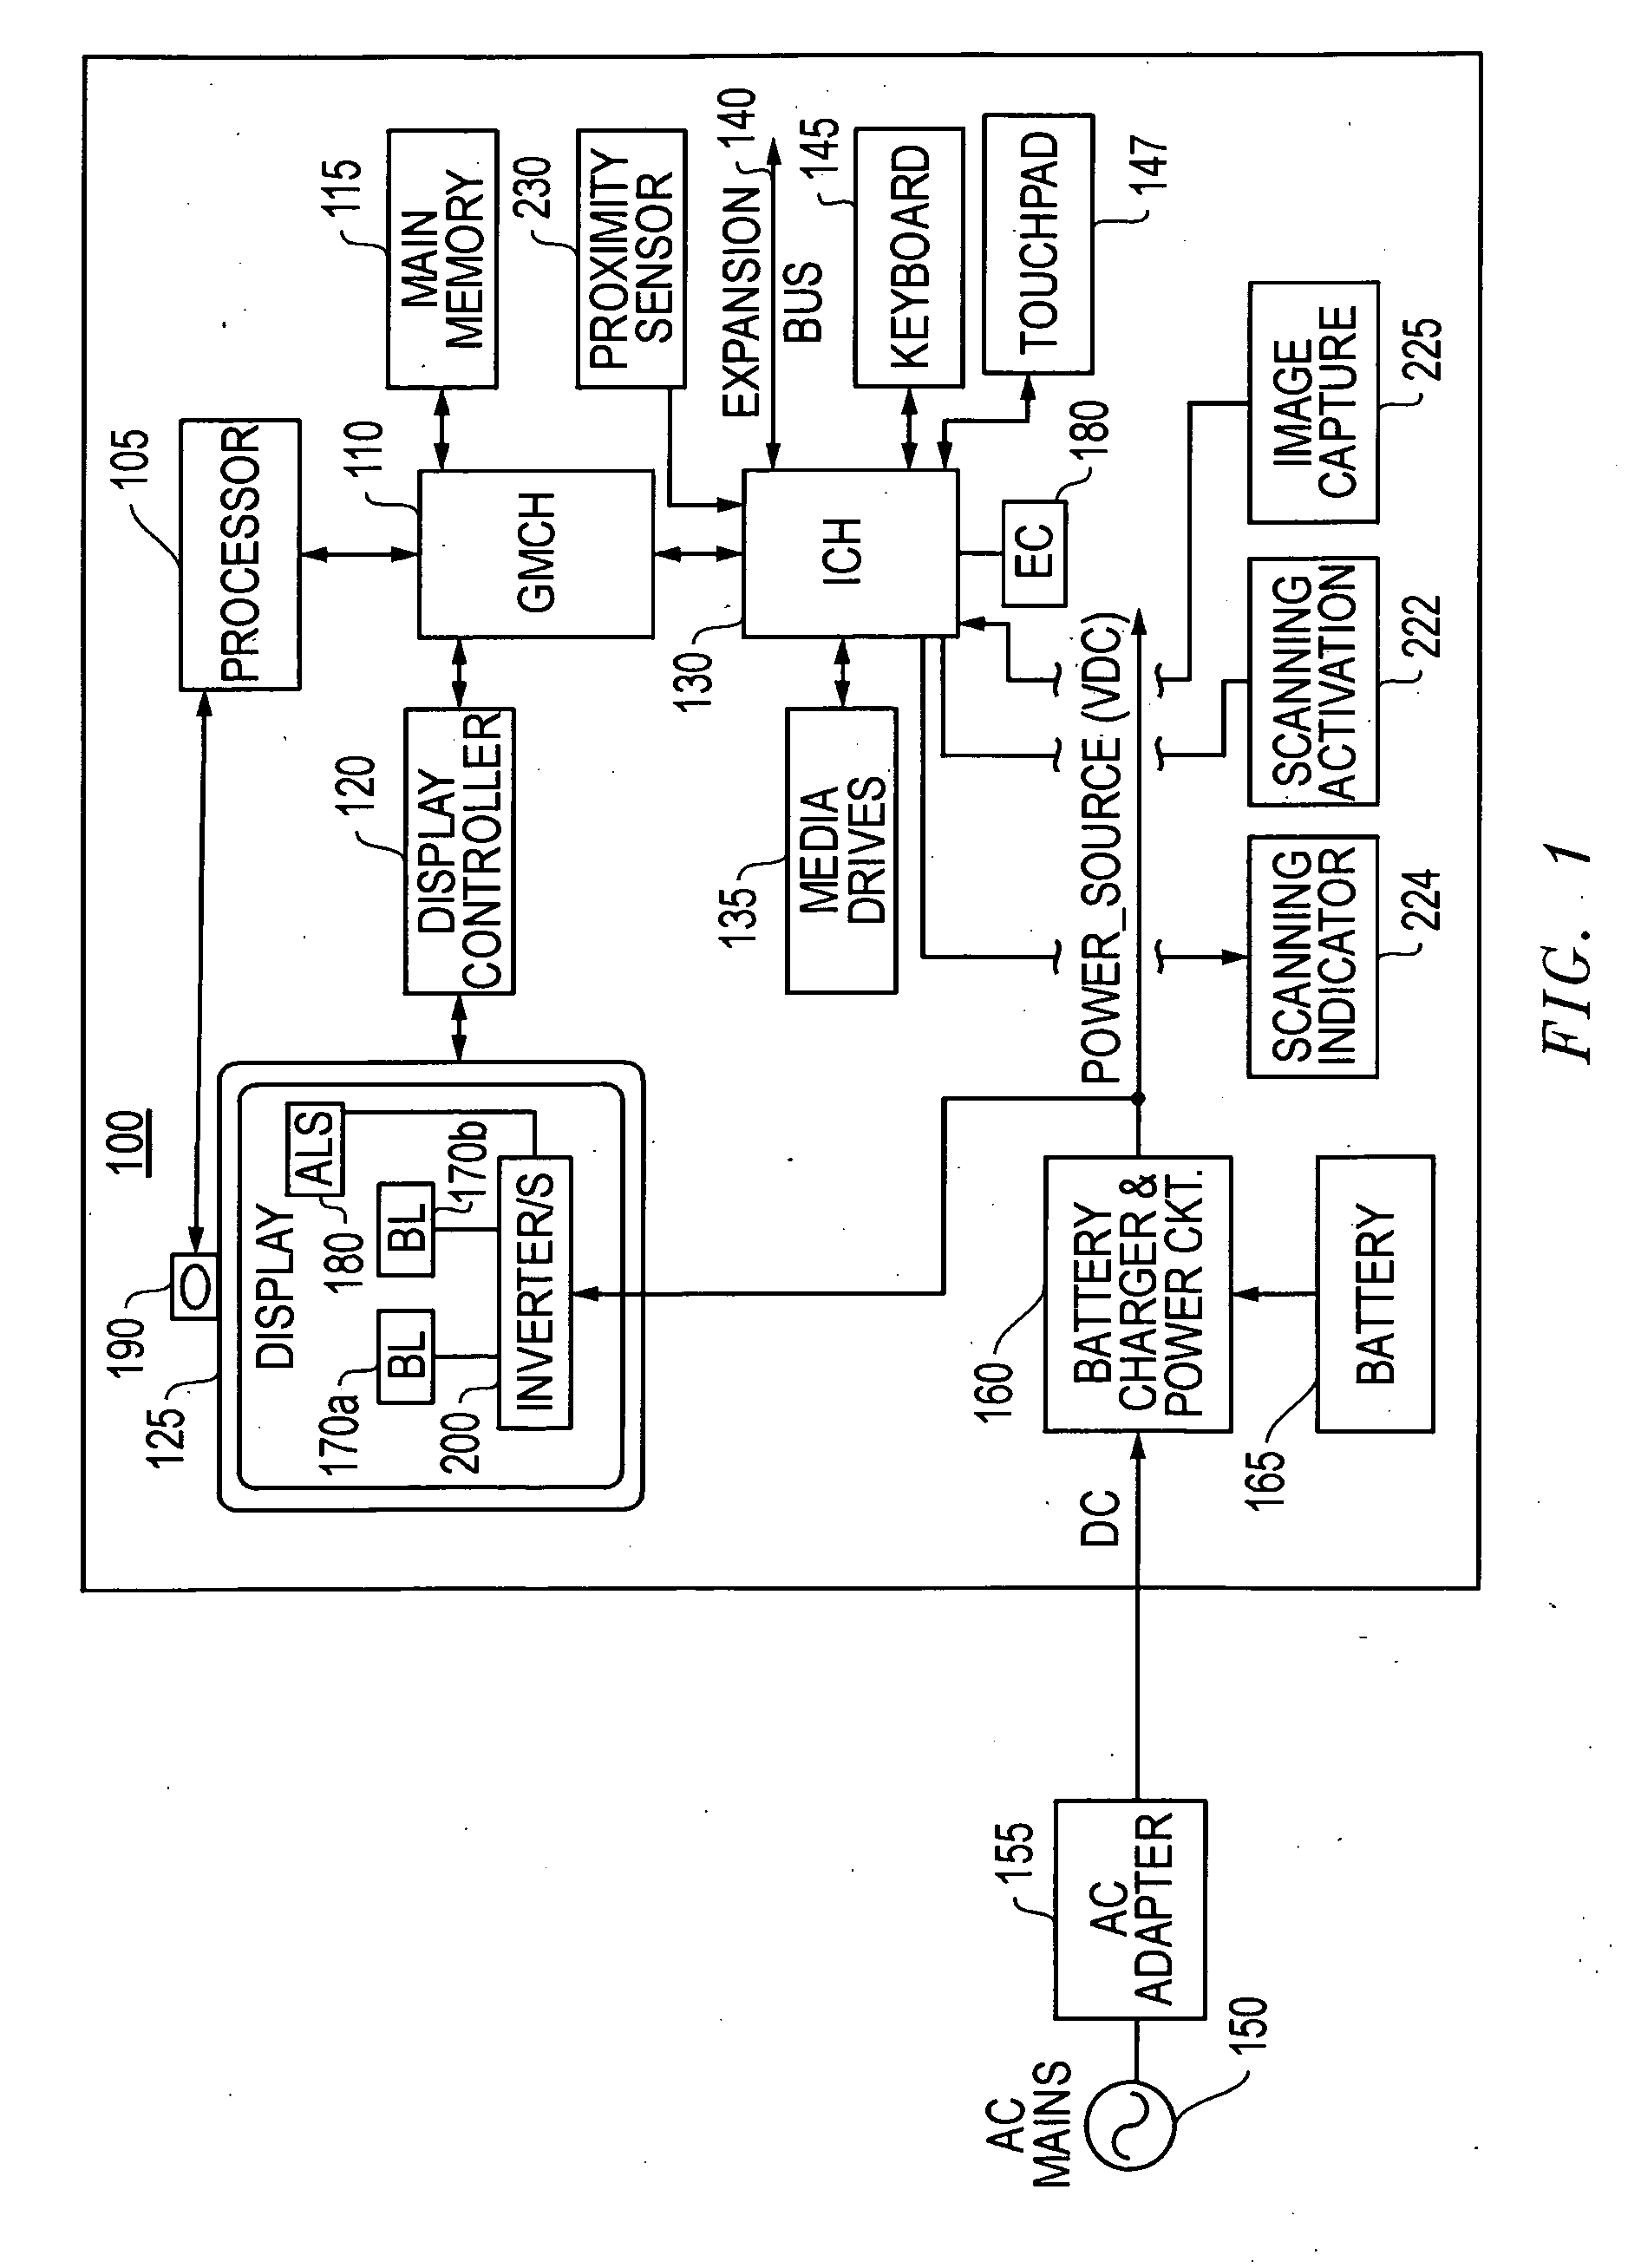 Systems and methods for document scanning using a variable intensity display of an information handling system